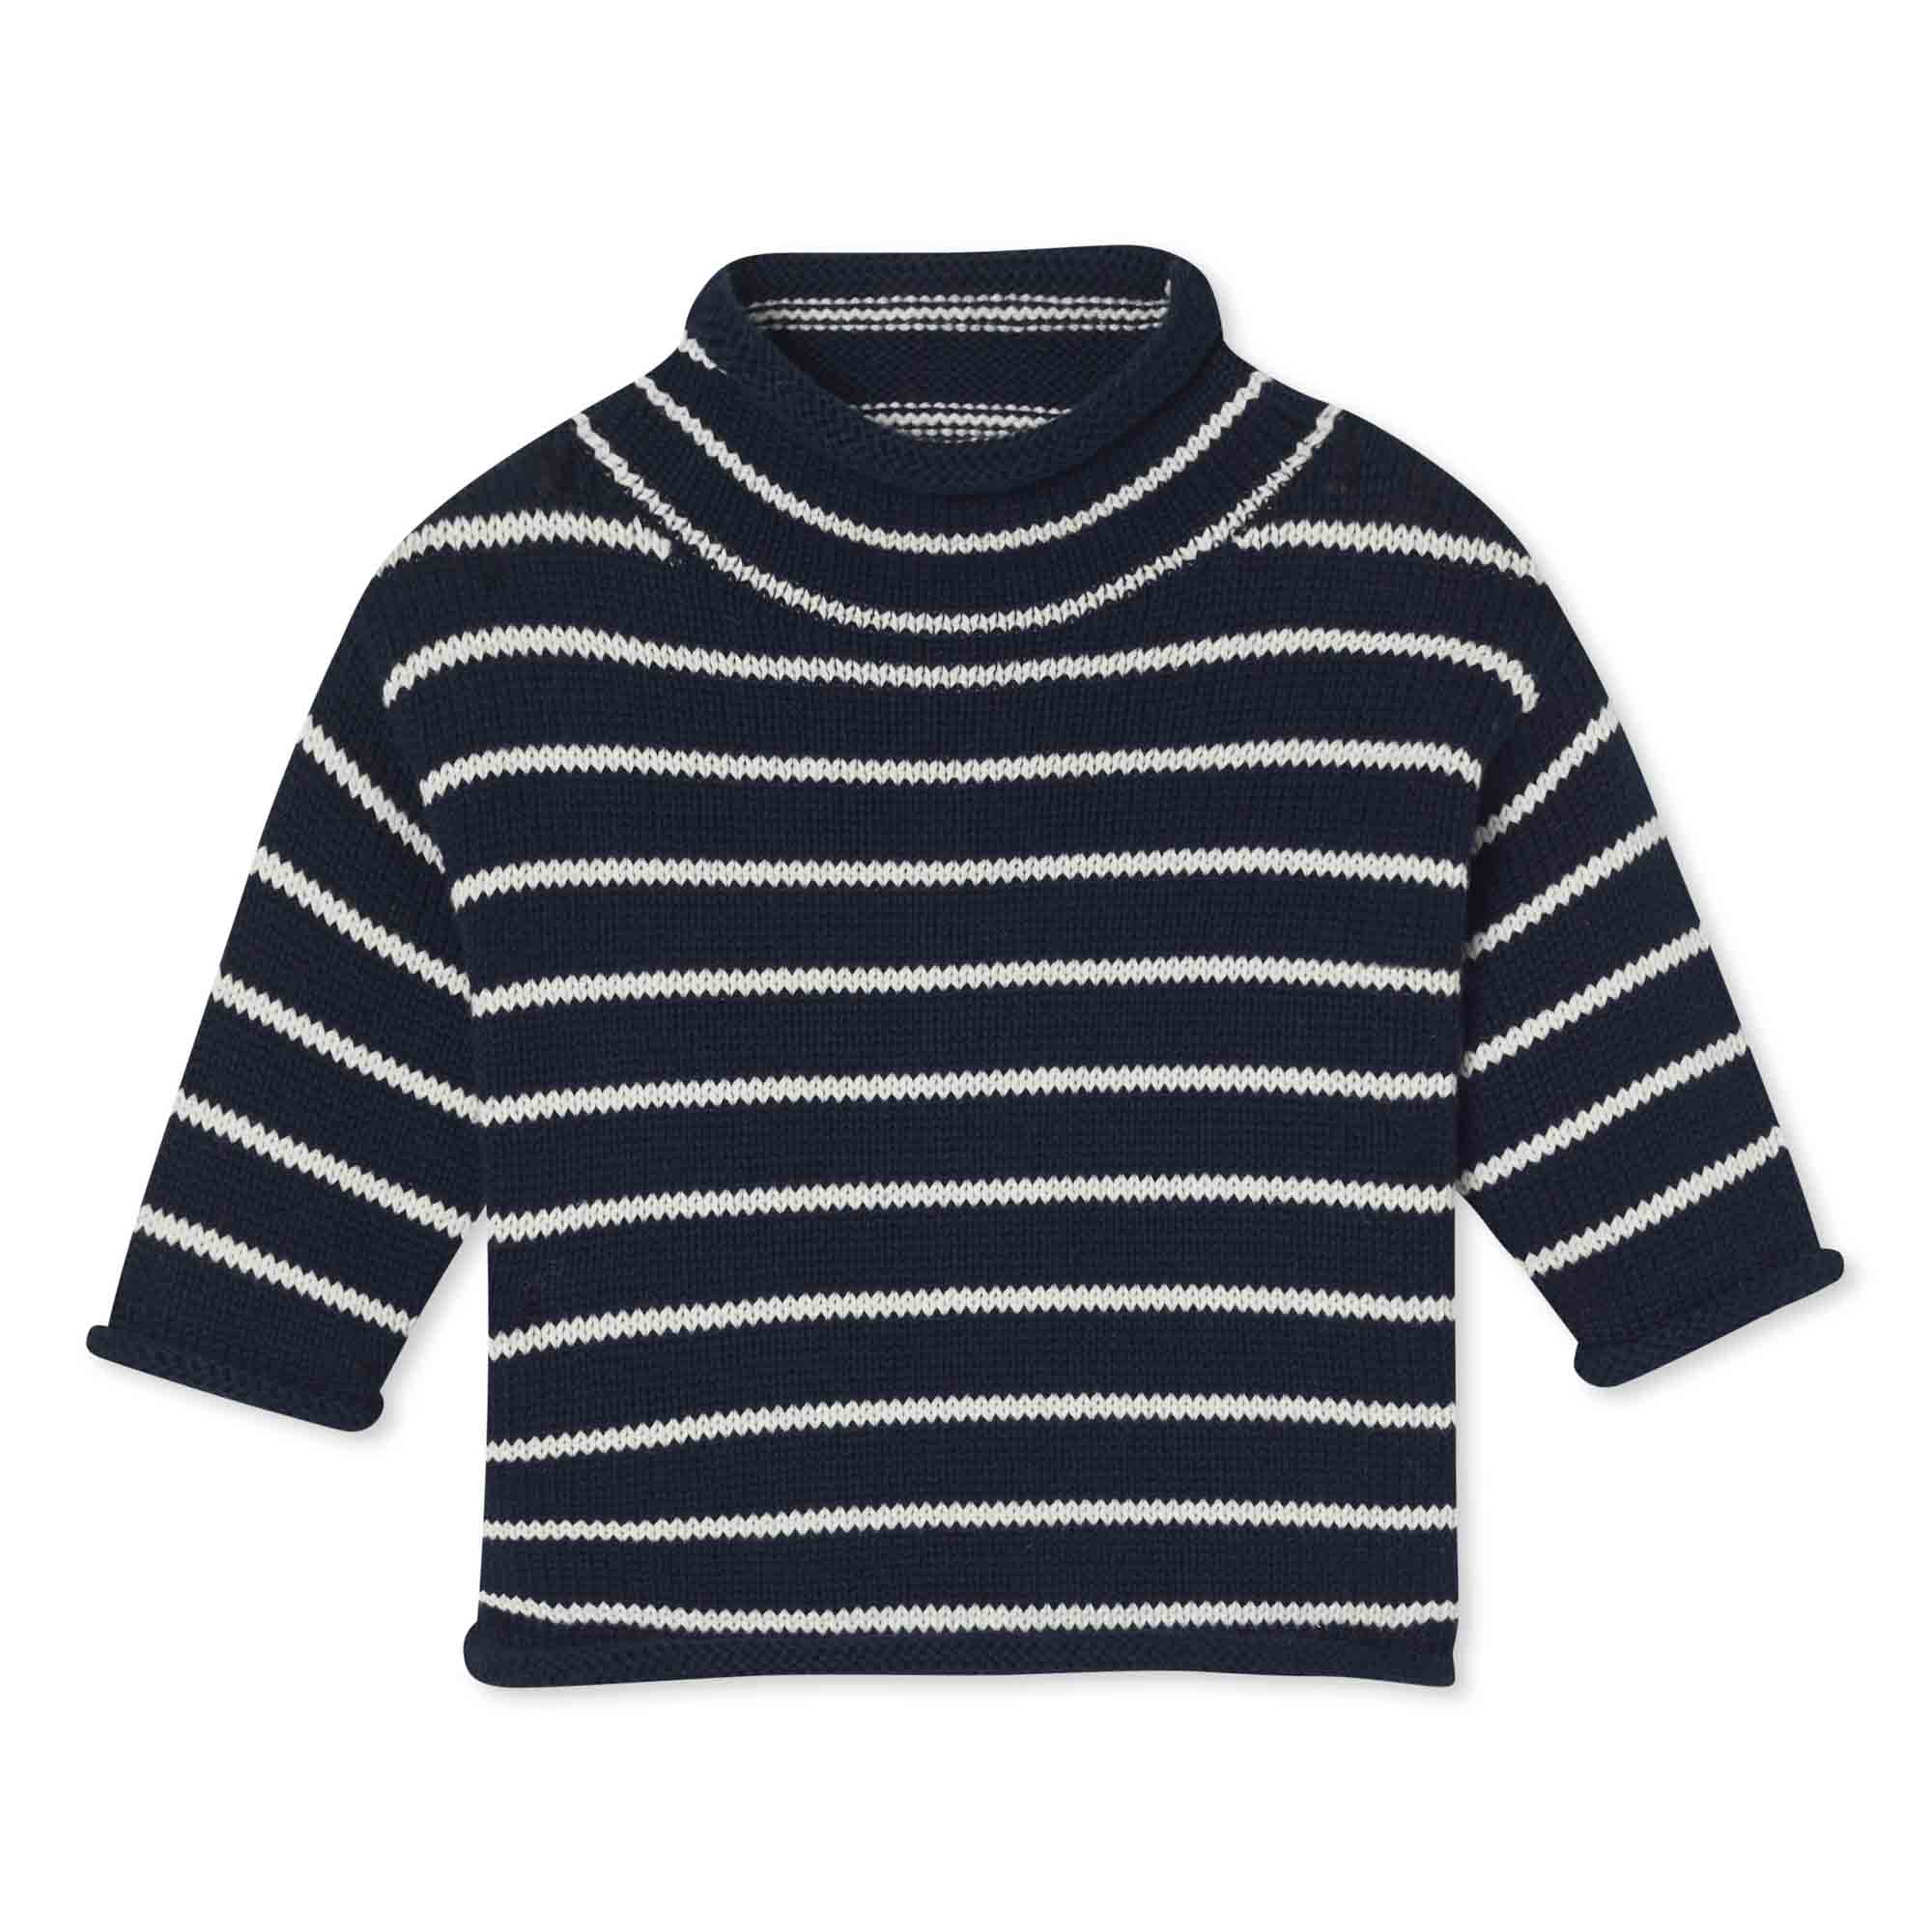 Fraser Roll Neck Sweater, Navy and Bright White